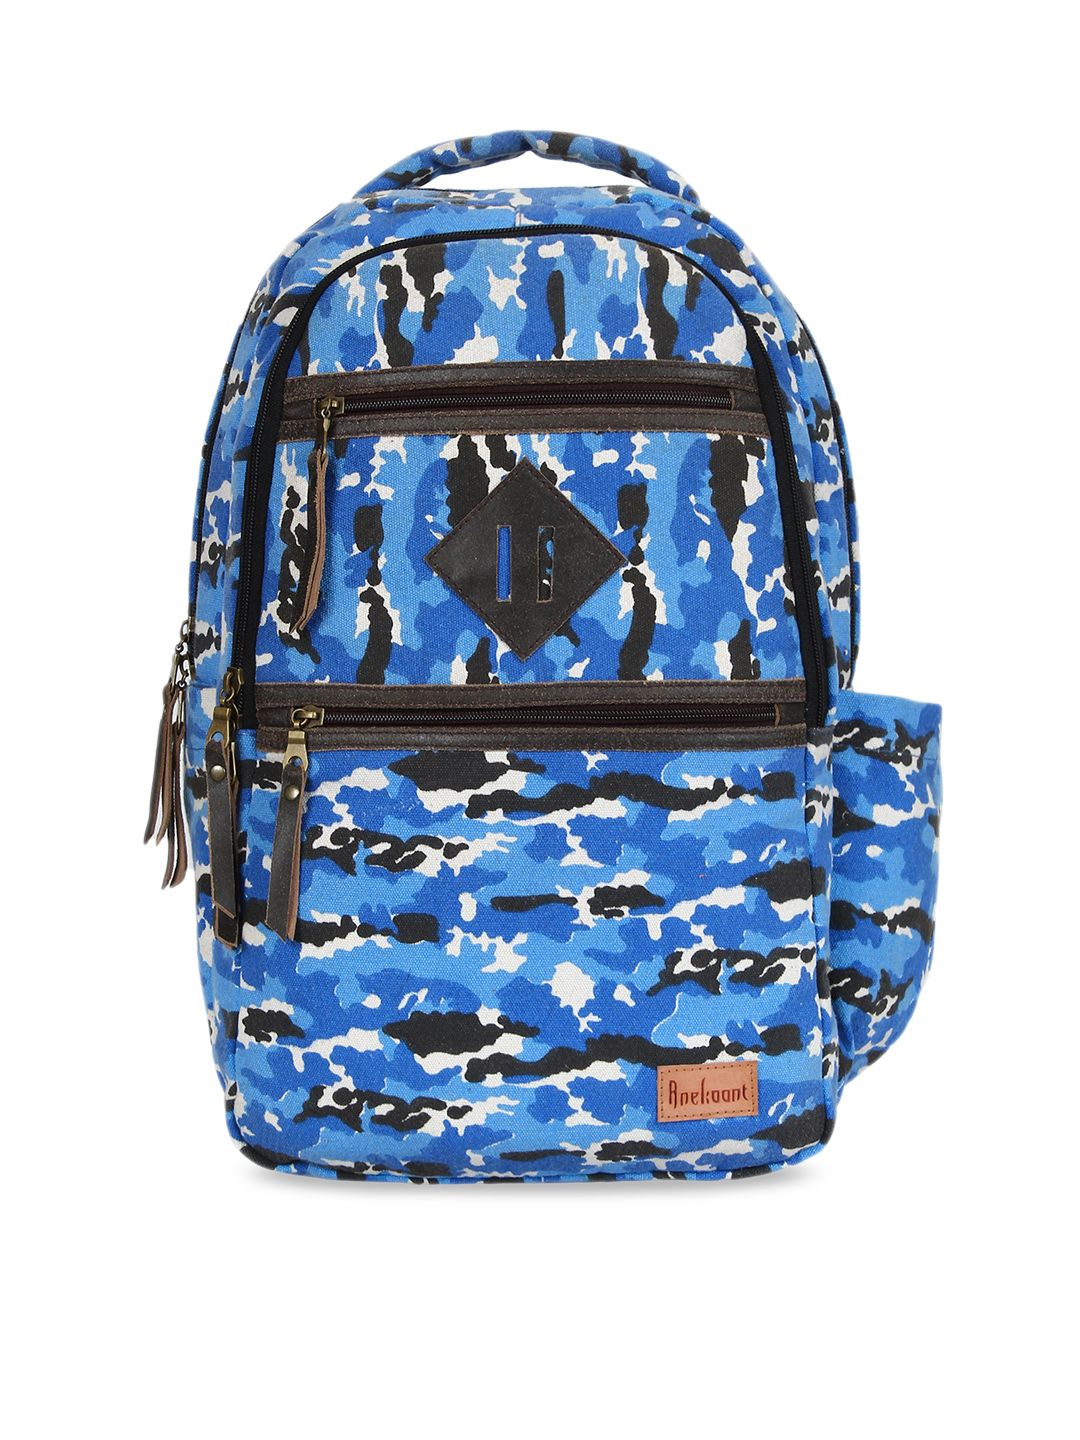 Anekaant Unisex Blue & Black Camouflage Backpack Price in India